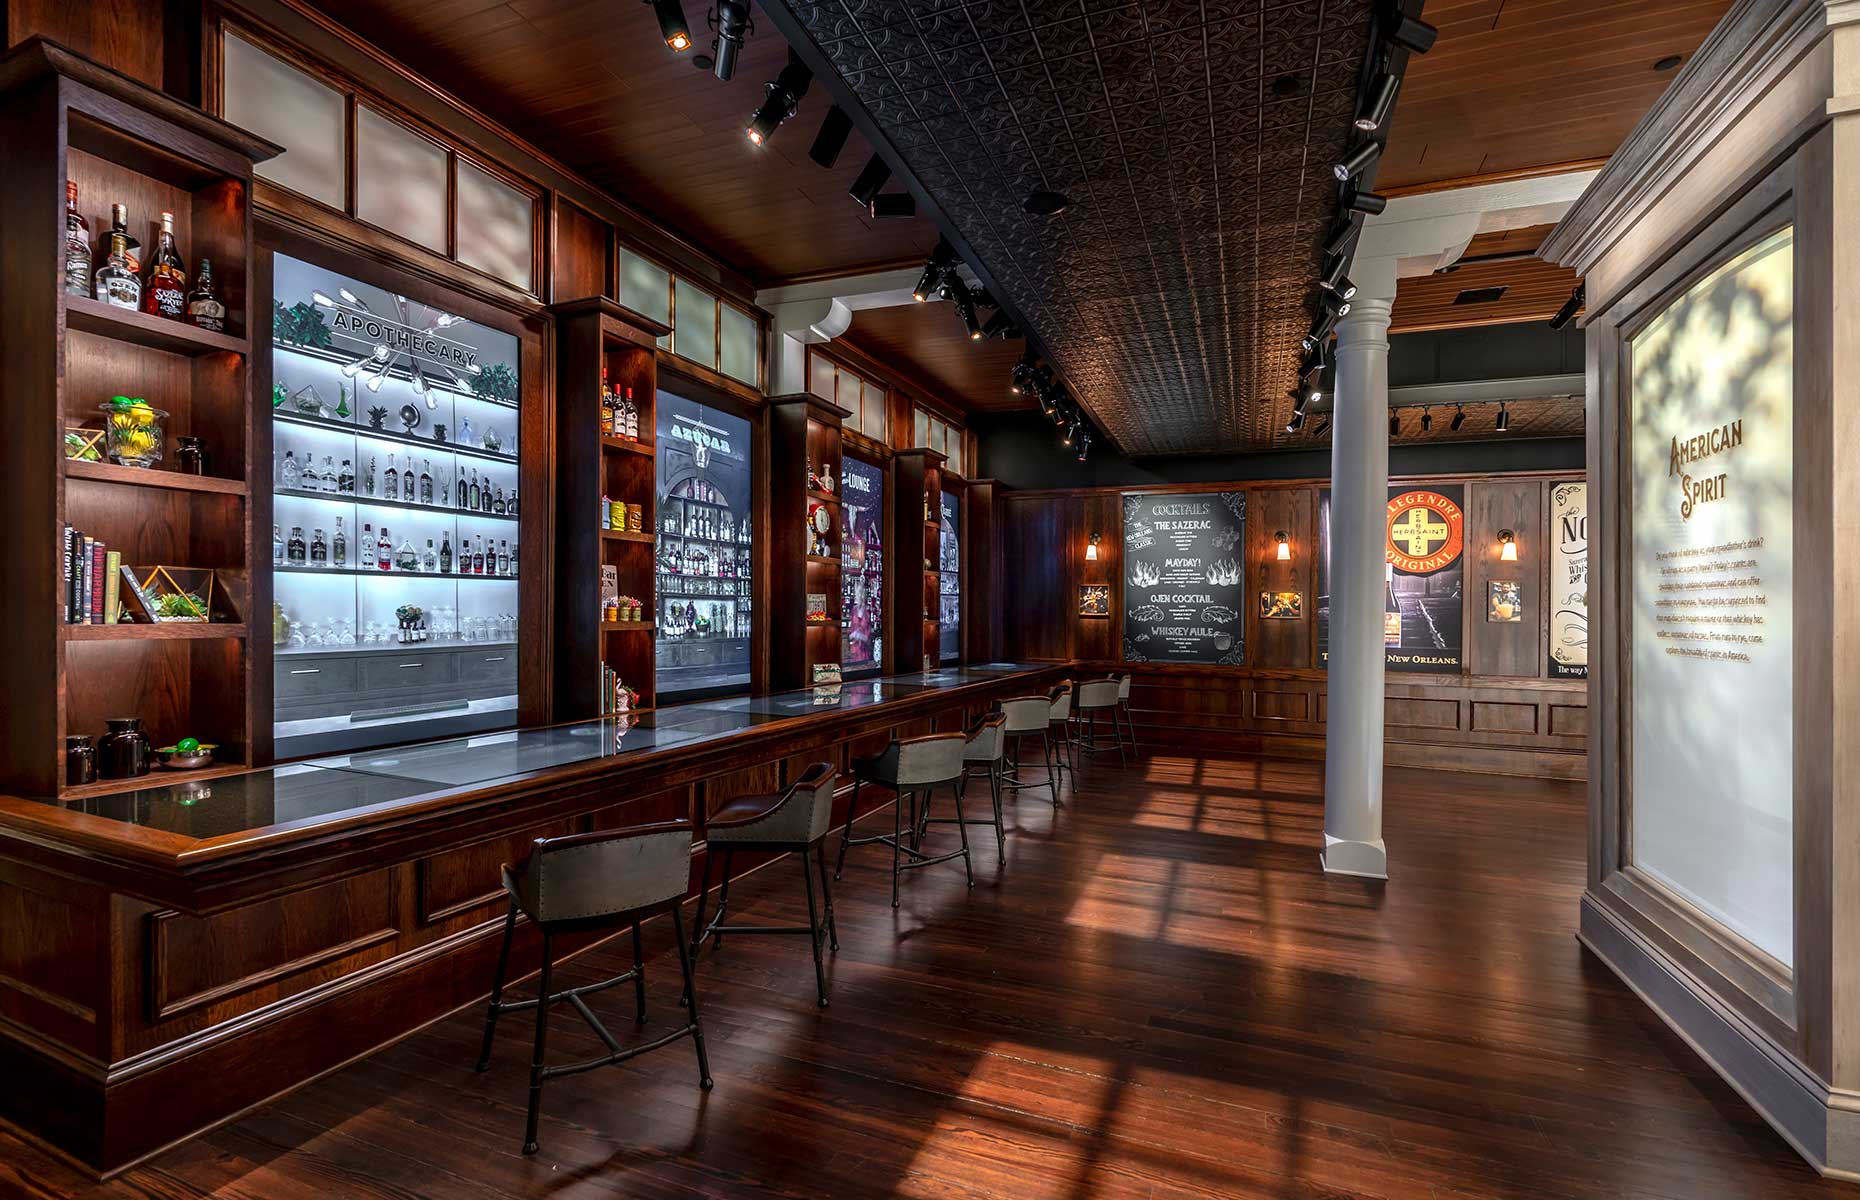 Sazerac House Museum (Image: Stephen Young/New Orleans & Company)